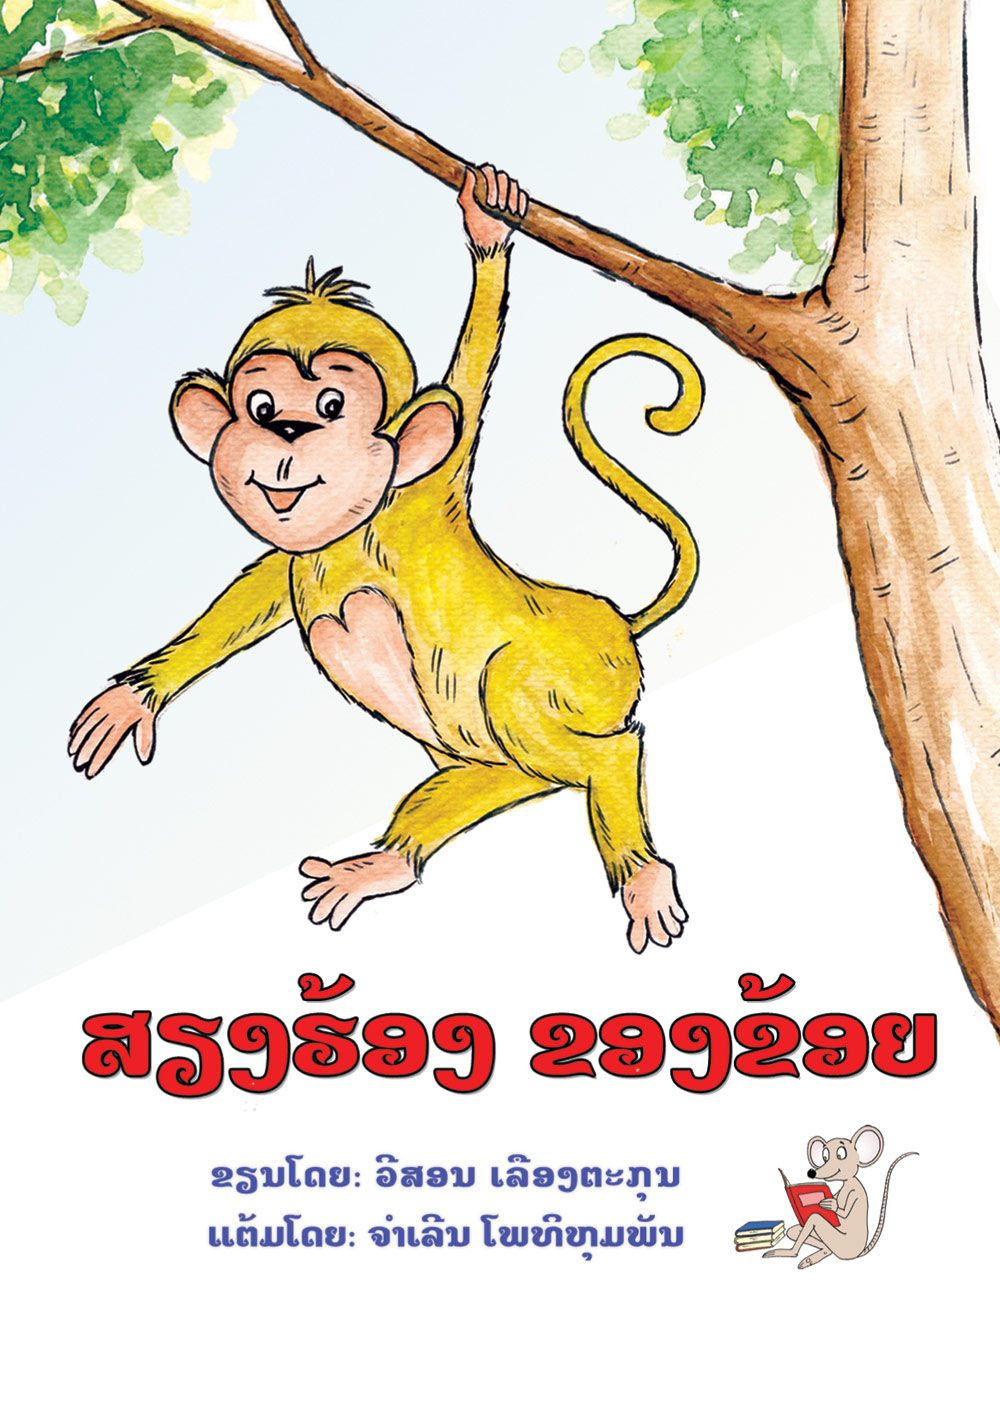 Hear My Voice! large book cover, published in Lao language